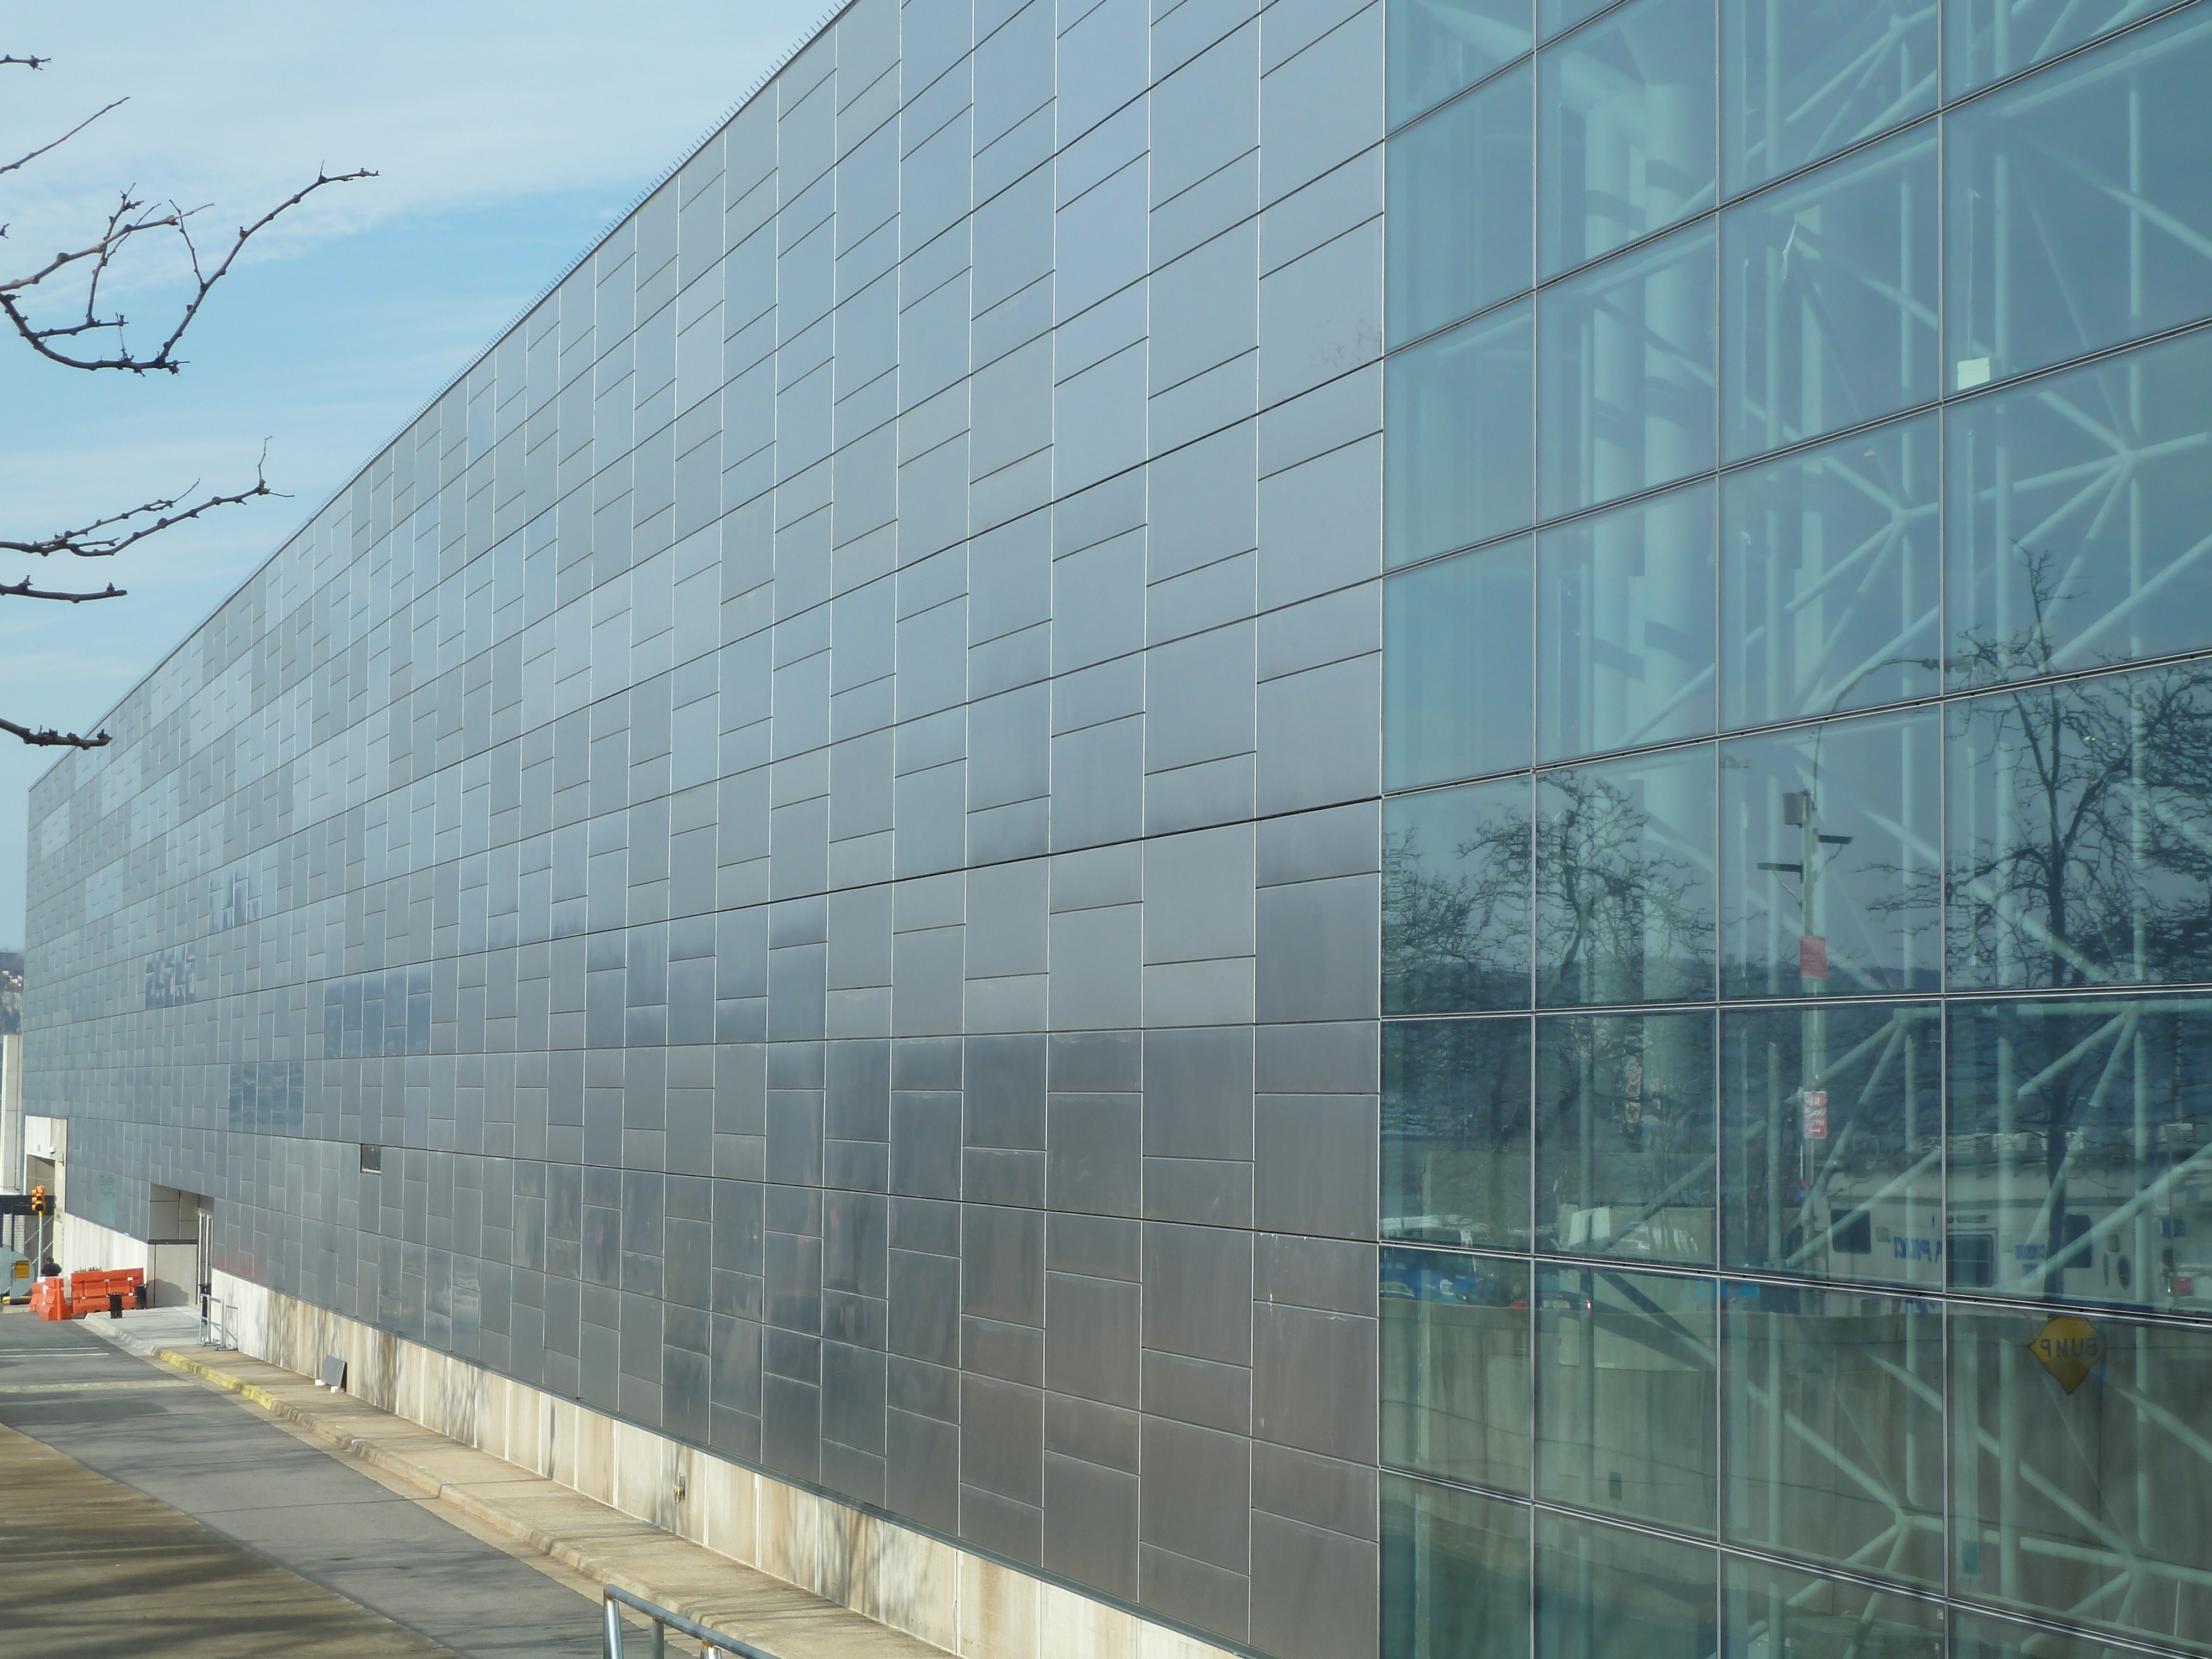 The combination of steel and low-reflective glass panels employed in the 2013 Jacob K. Javits Convention Center renovation reduced bird deaths at the site by over 90 percent.